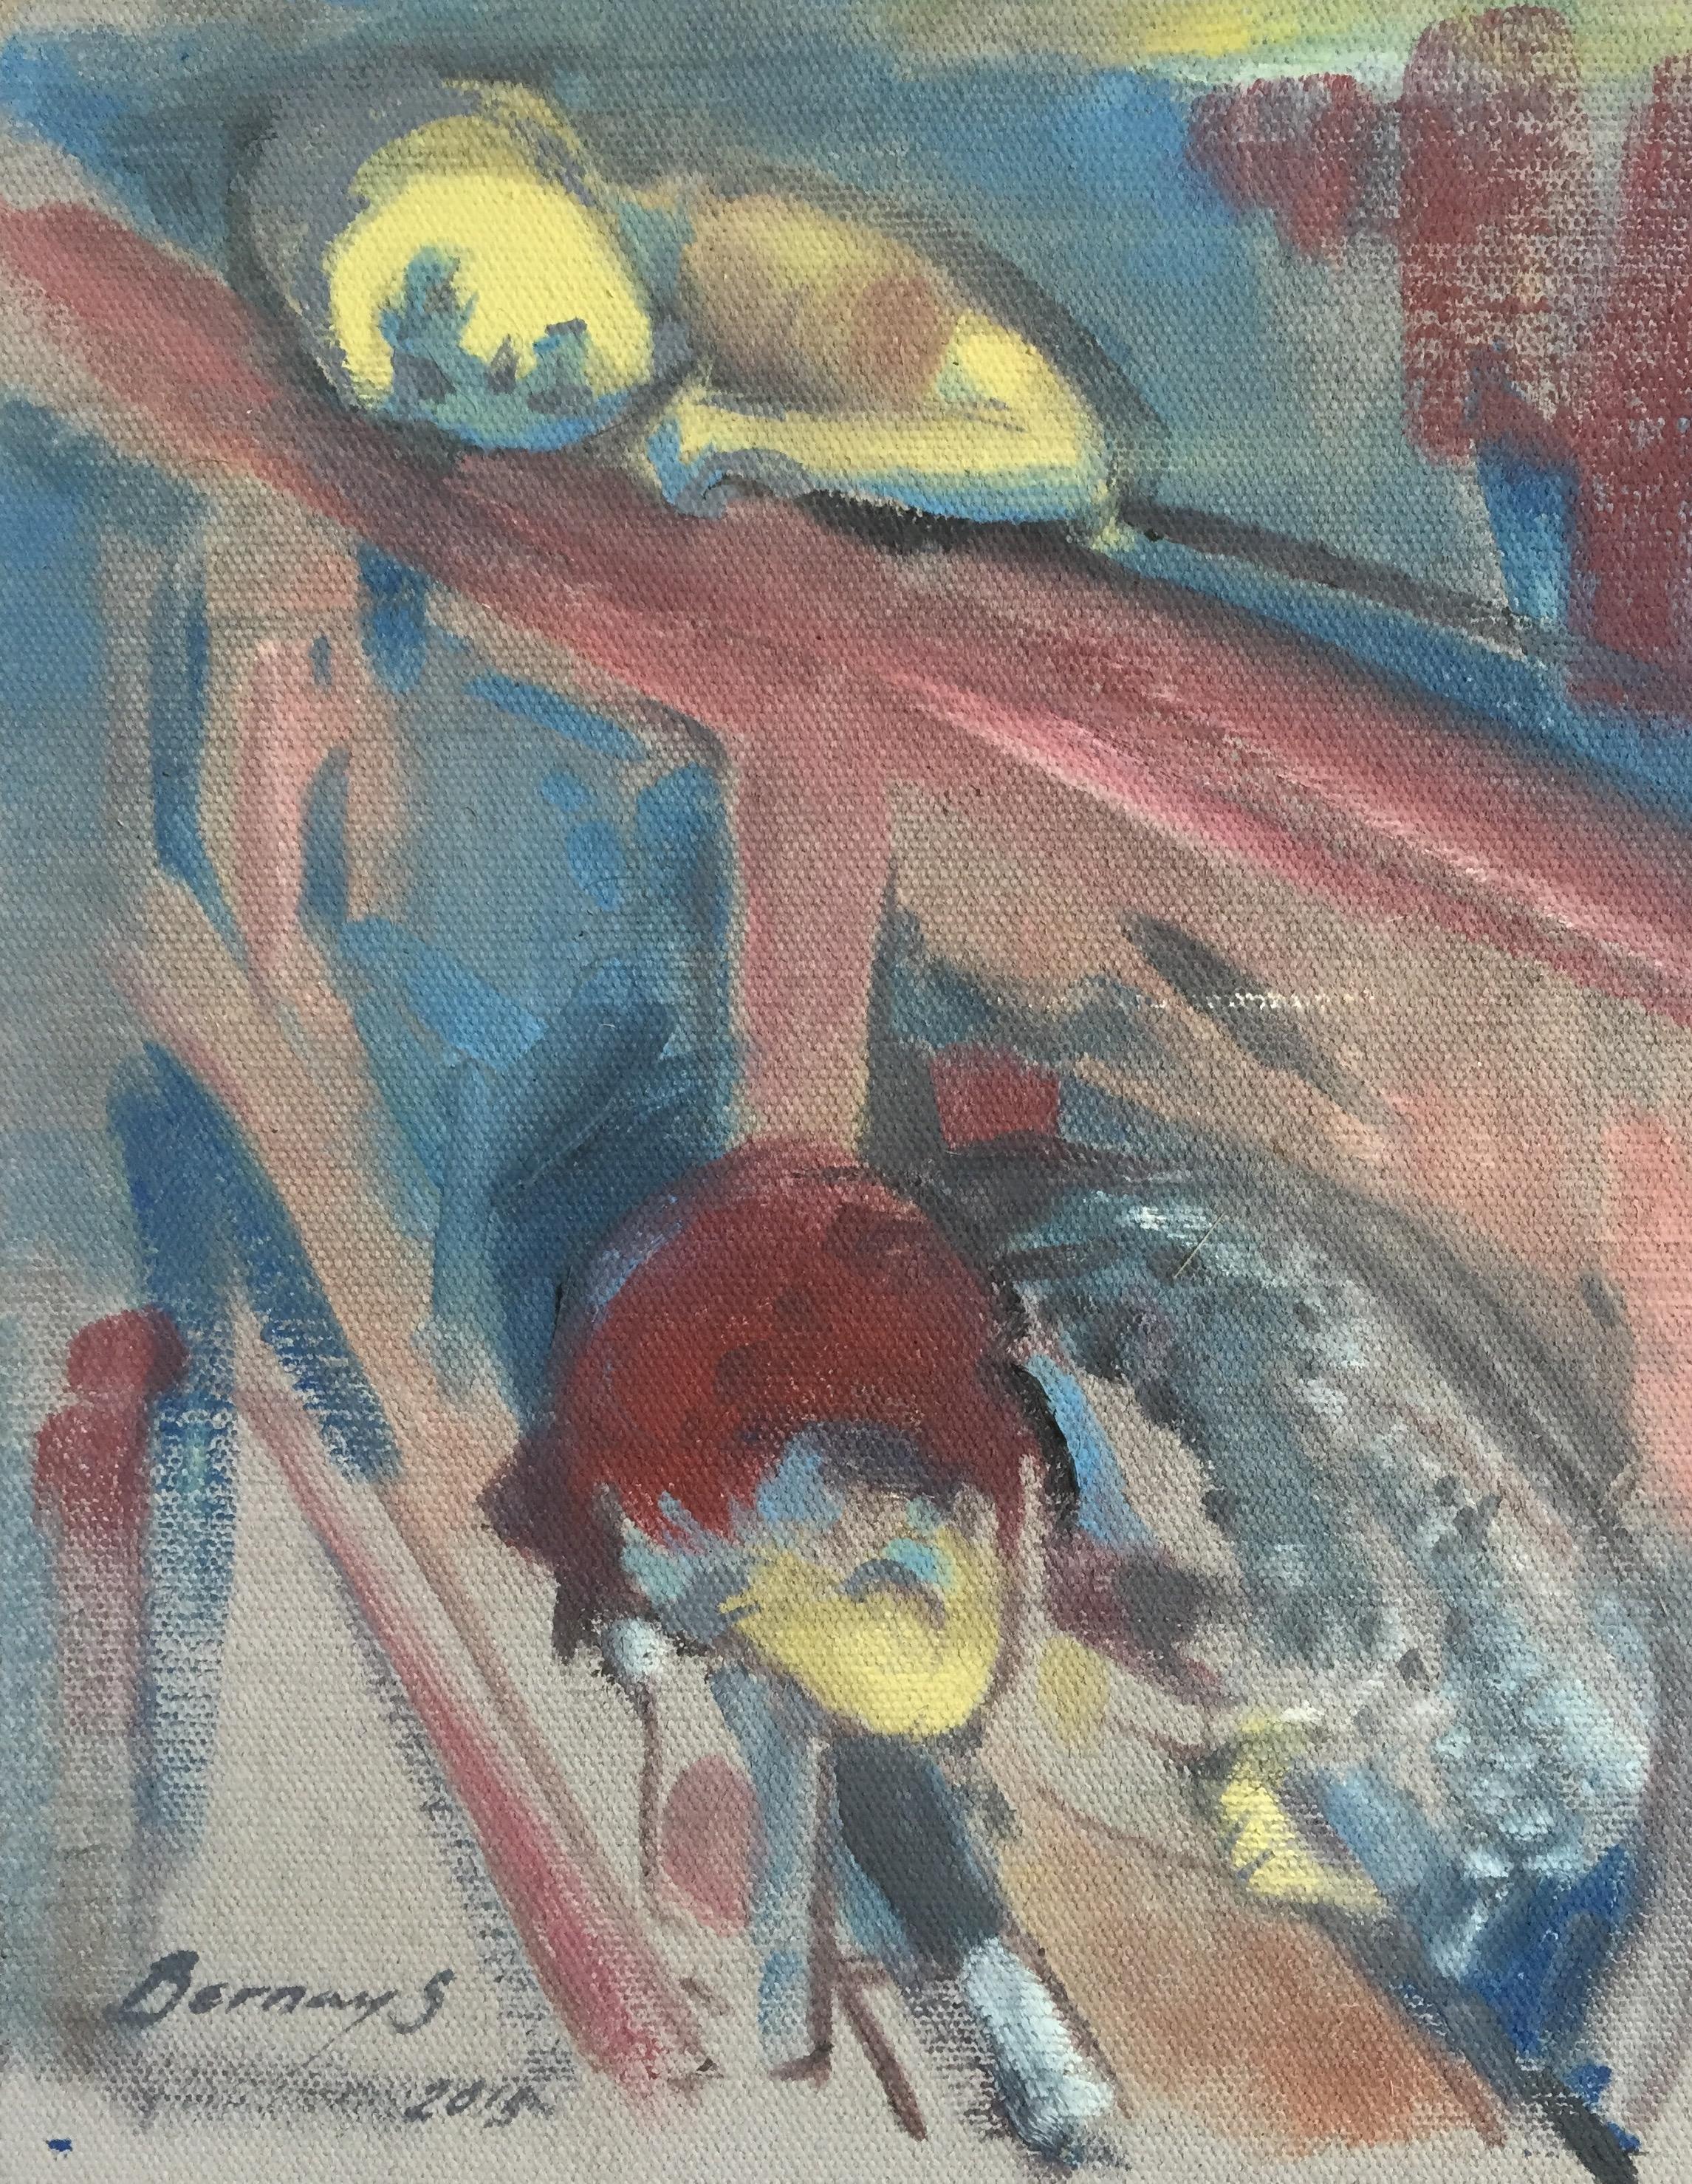 This small psychological painting continues the themes of family and growing up. The us and them, the camaraderie of boundaries and how those family structures shape us into the people we will become :: Painting :: Impressionist :: This piece comes